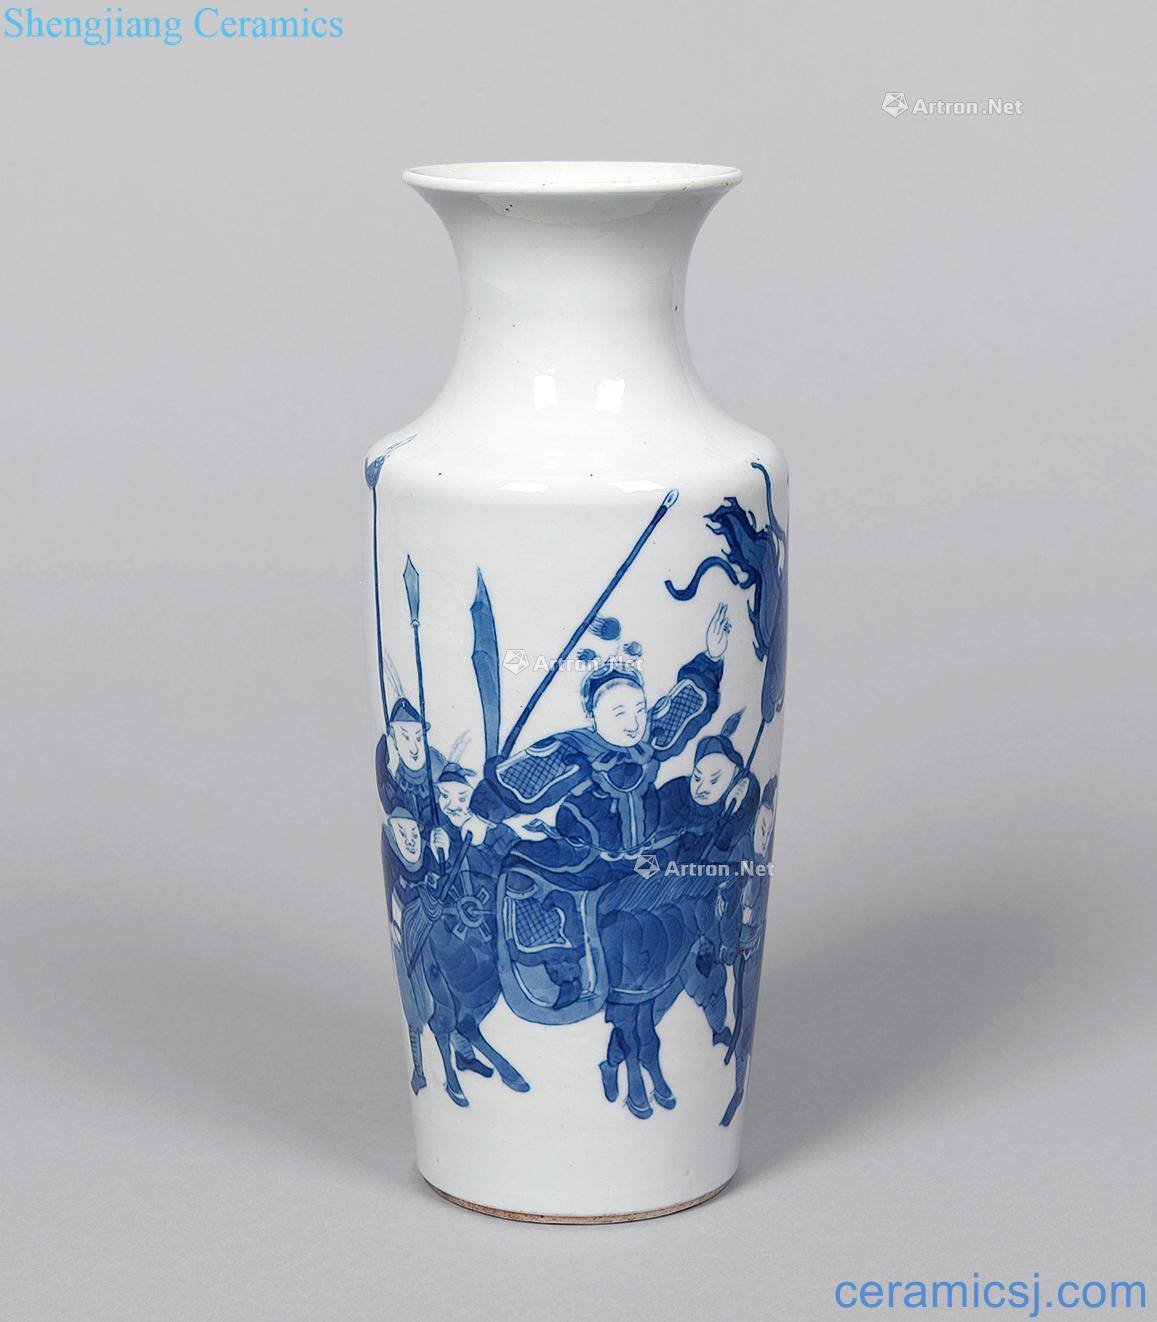 The late qing dynasty porcelain bottle war characters